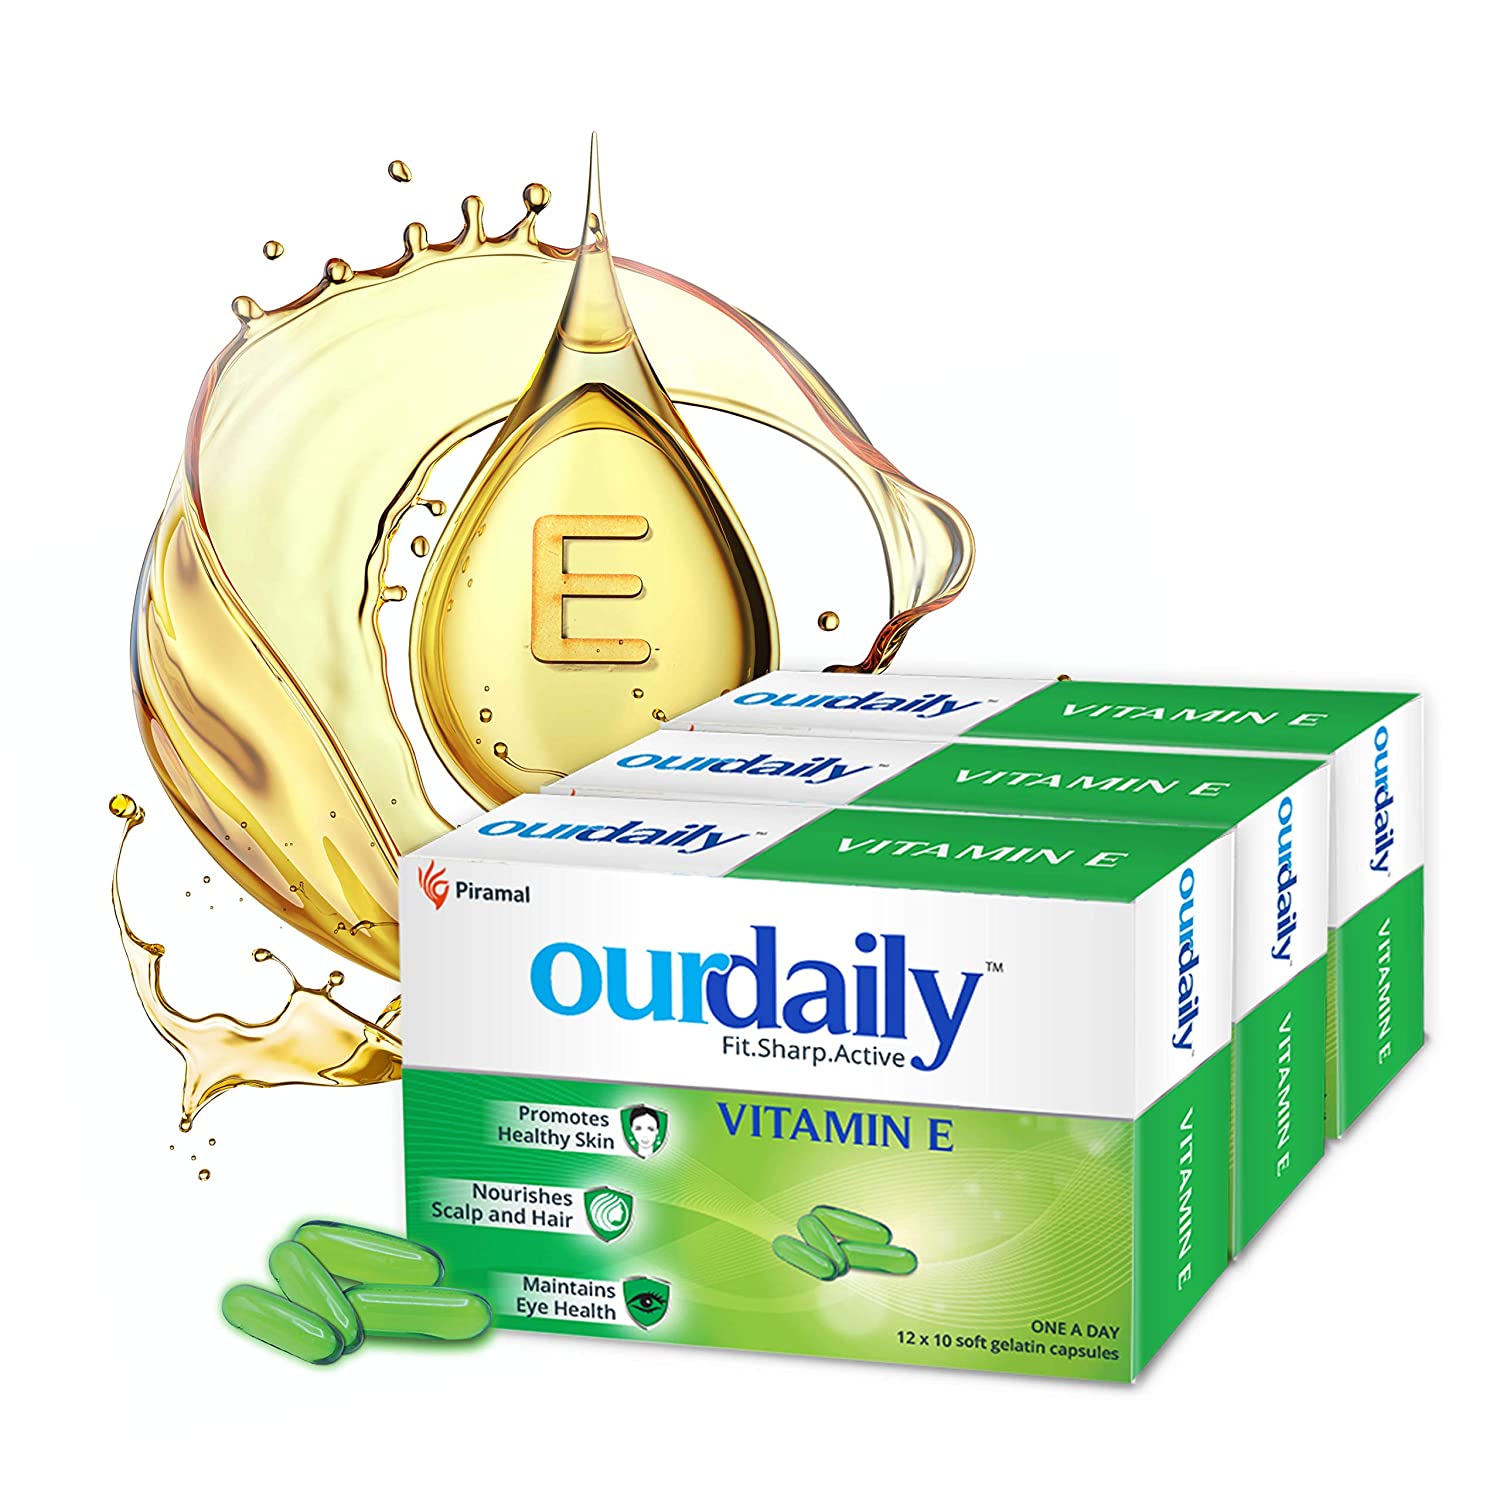 OurDaily Vitamin E Supplements | Promotes Healthy Skin & Nourishes Hair-400 mg